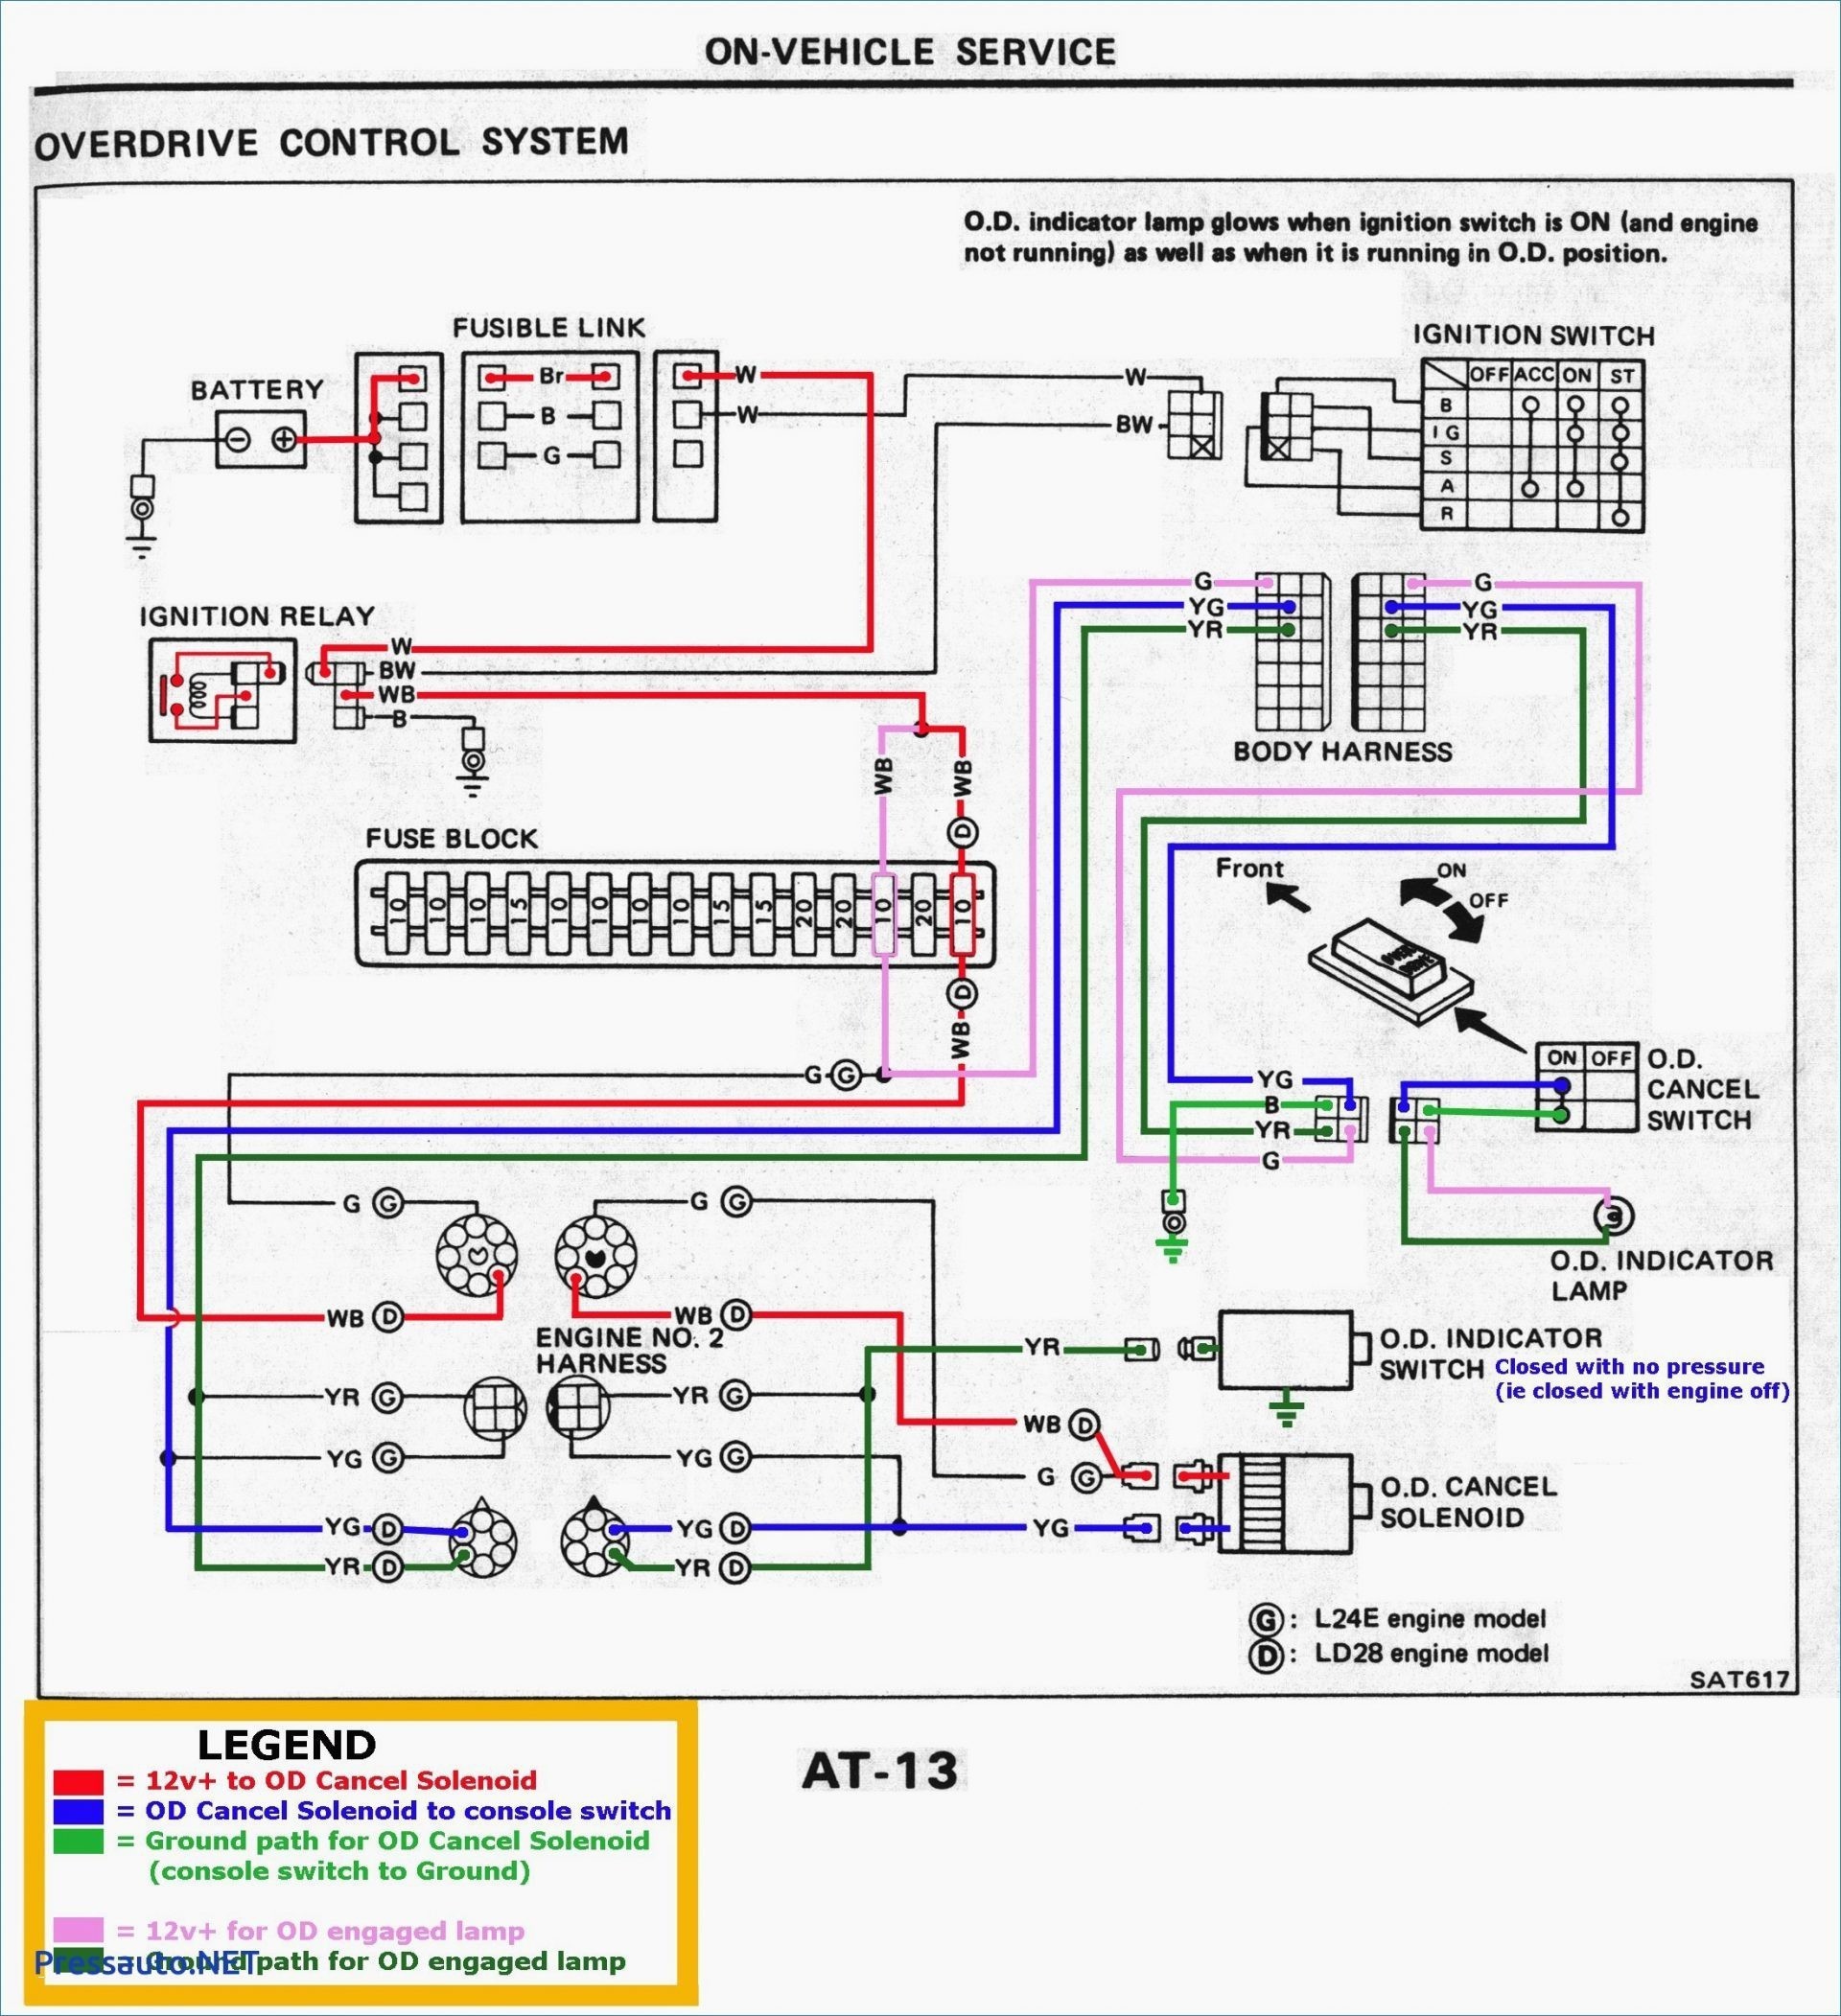 2002 ford Explorer V8 Engine Diagram ford Stereo Wiring Harness Diagram Pickenscountymedicalcenter Of 2002 ford Explorer V8 Engine Diagram